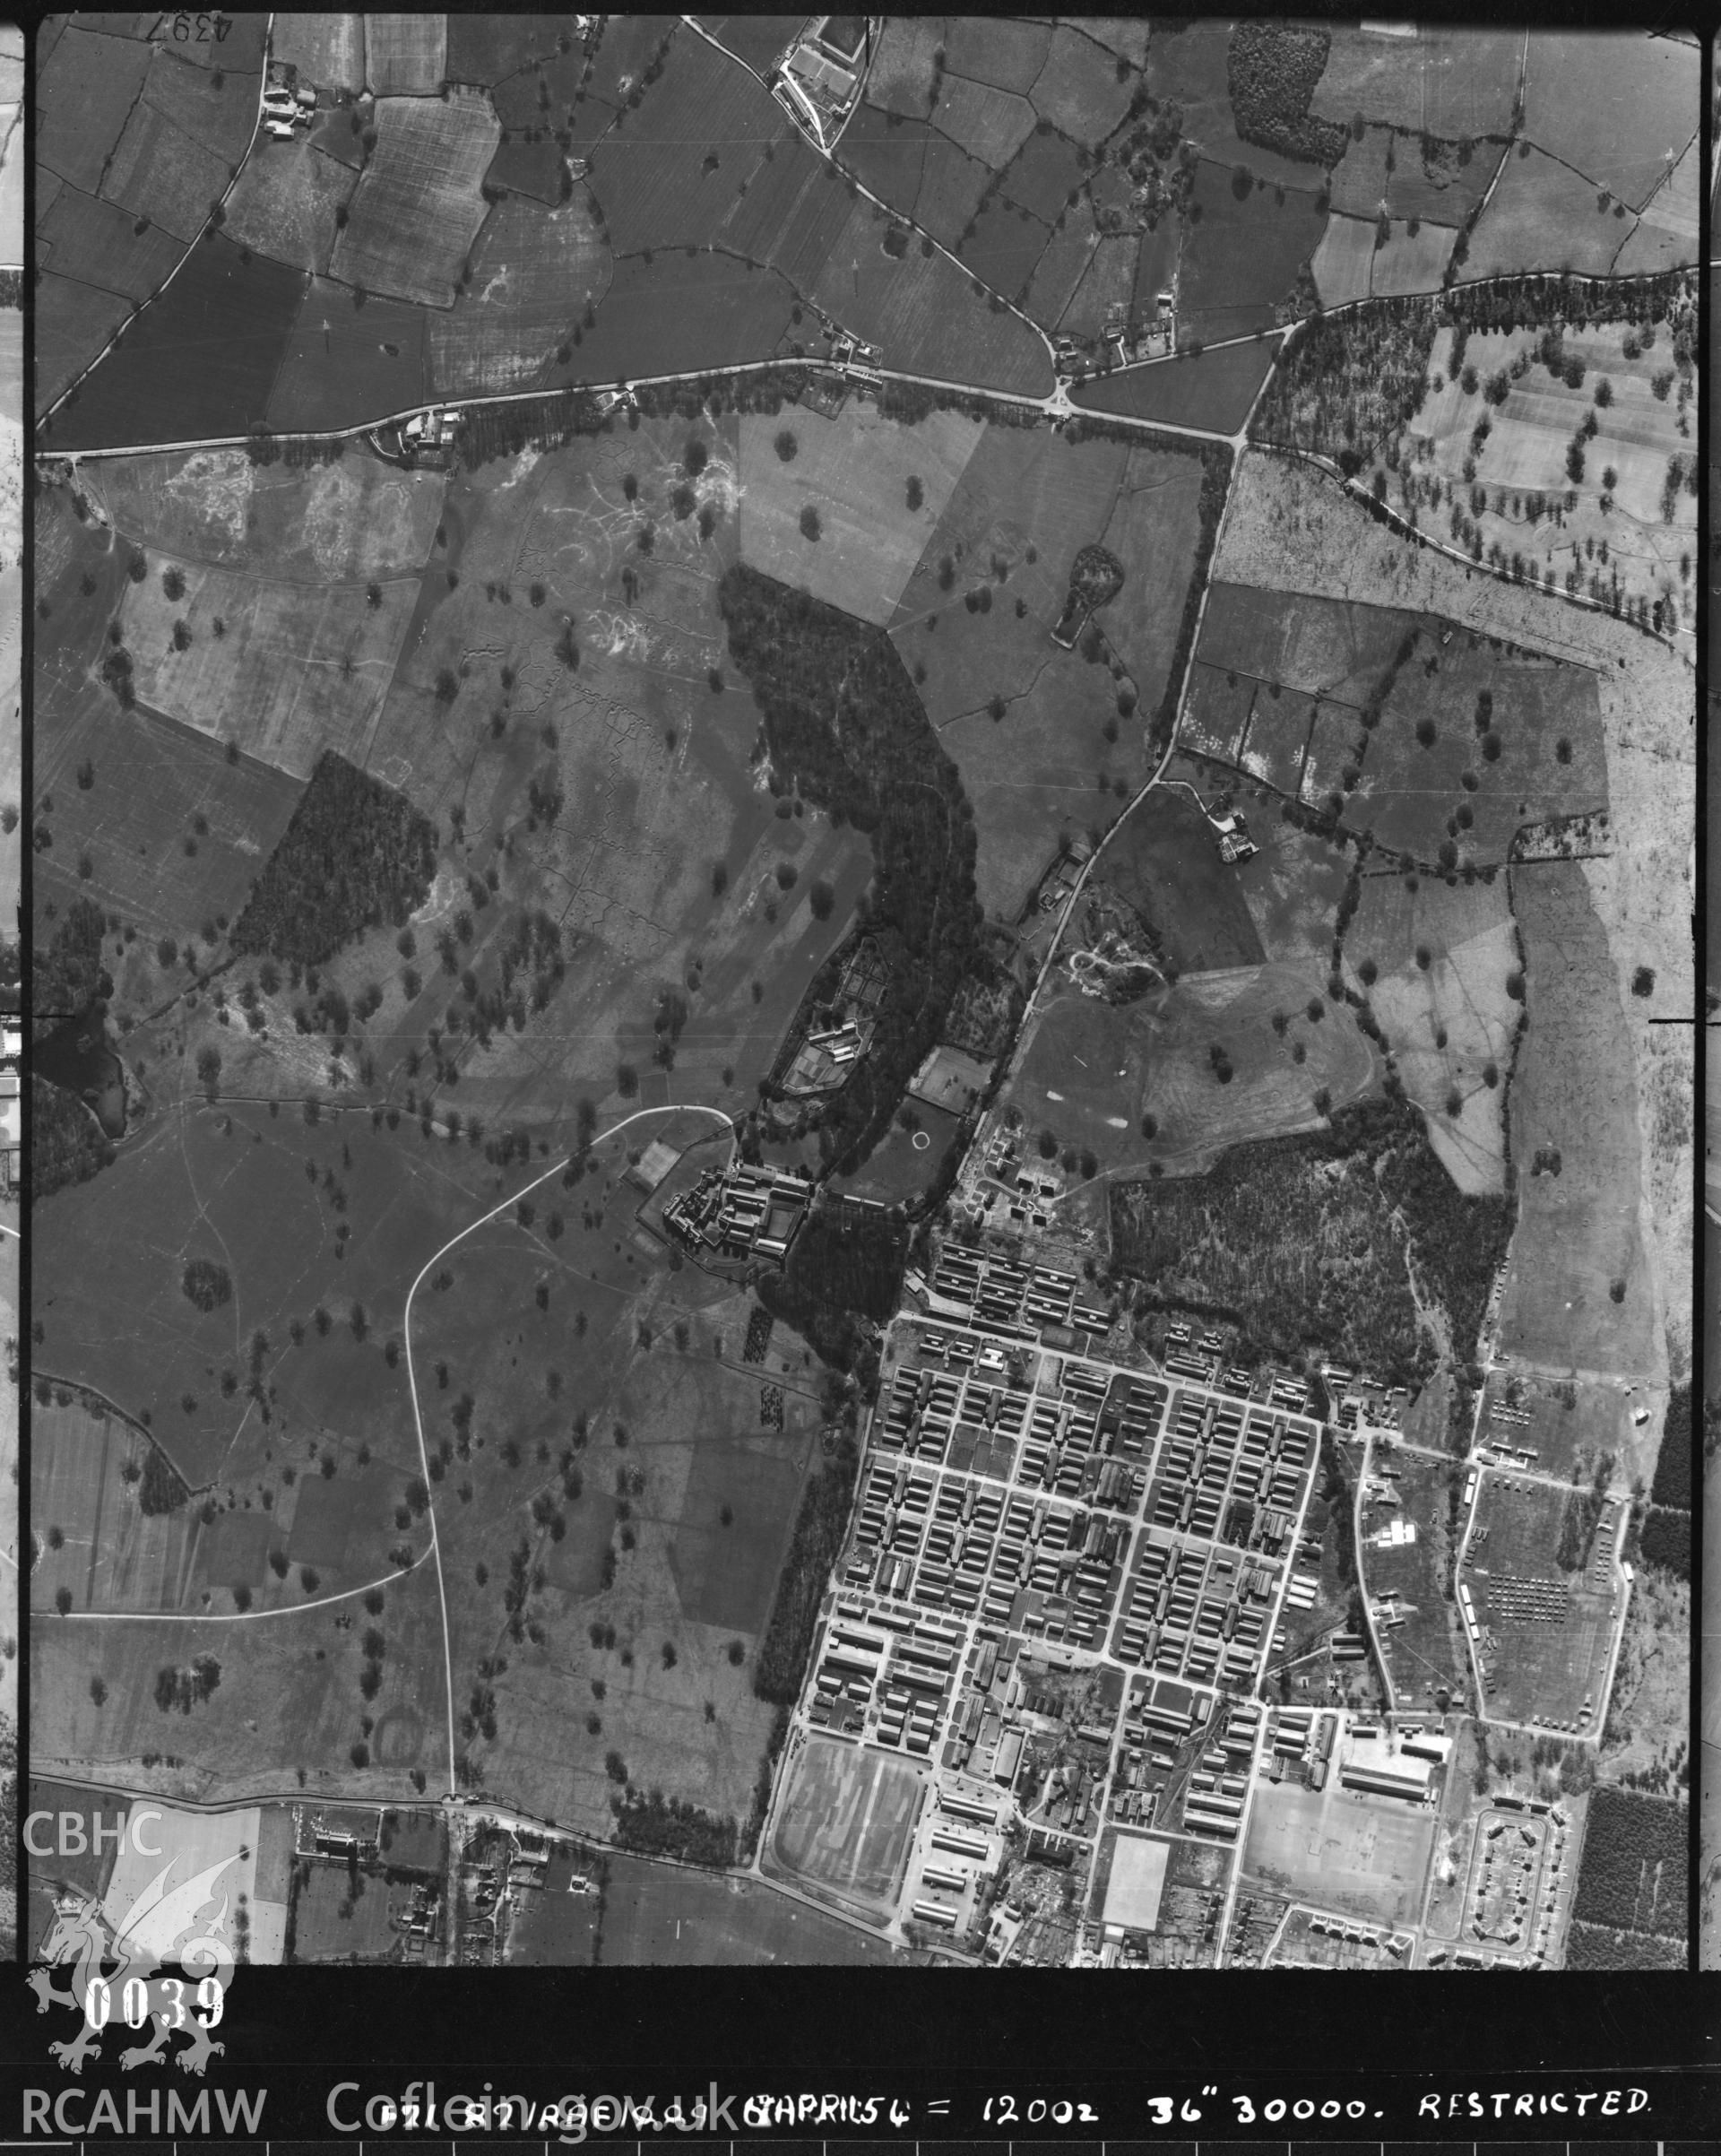 Black and white vertical aerial photograph, taken by the RAF, showing area around Bodelwyddan Park, April 1954.